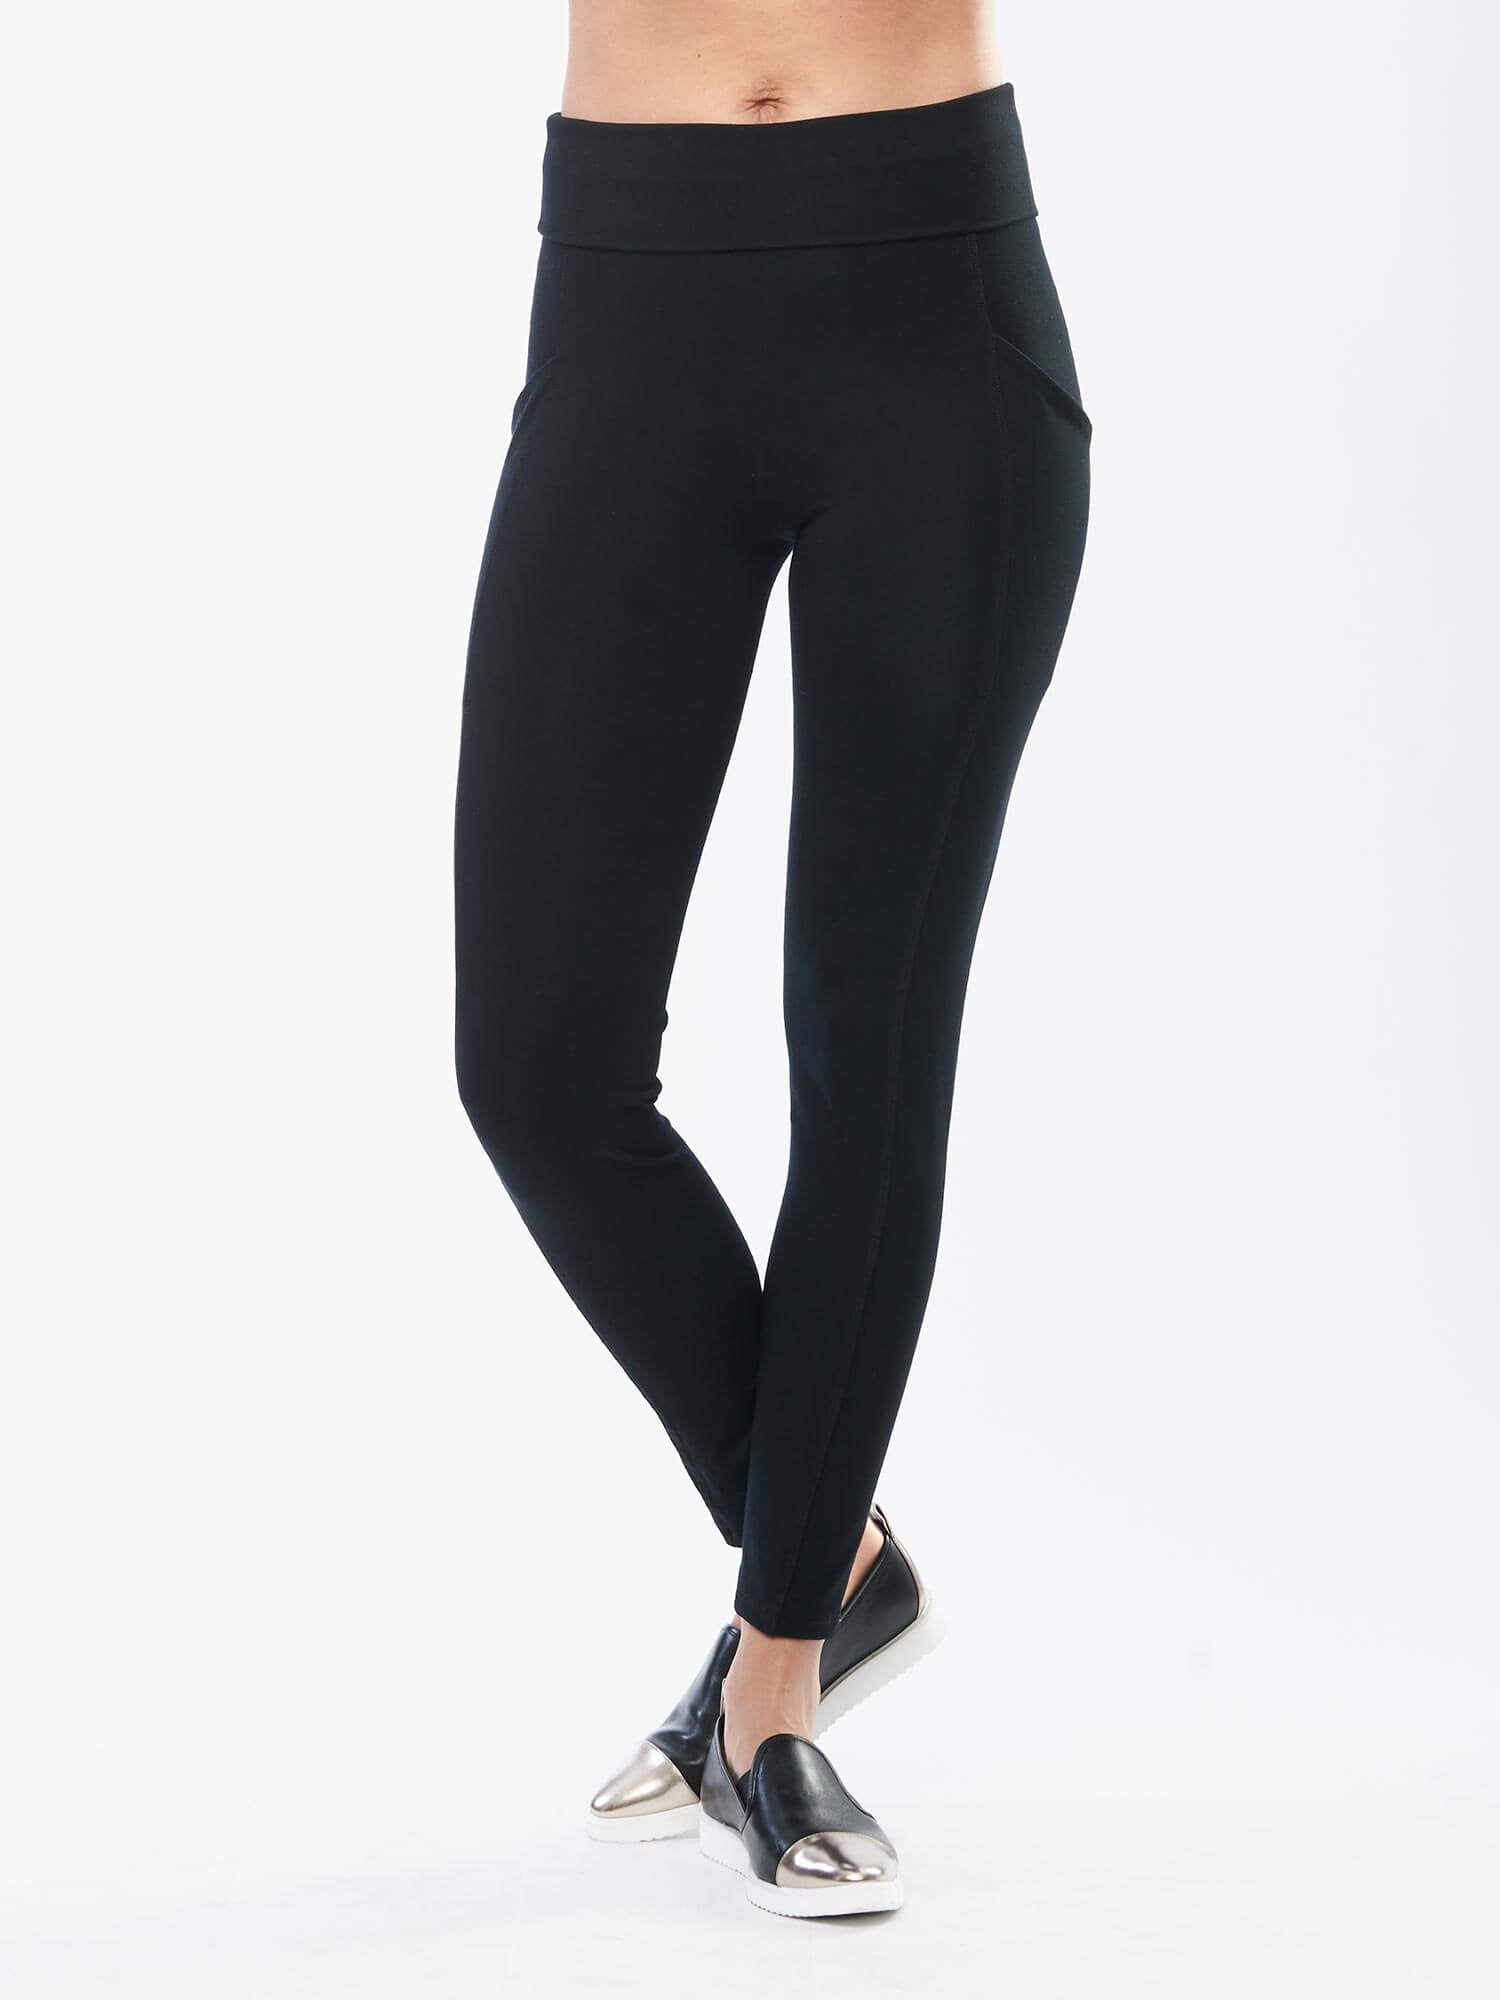 High Waisted Pocket Leggings, Made in Canada